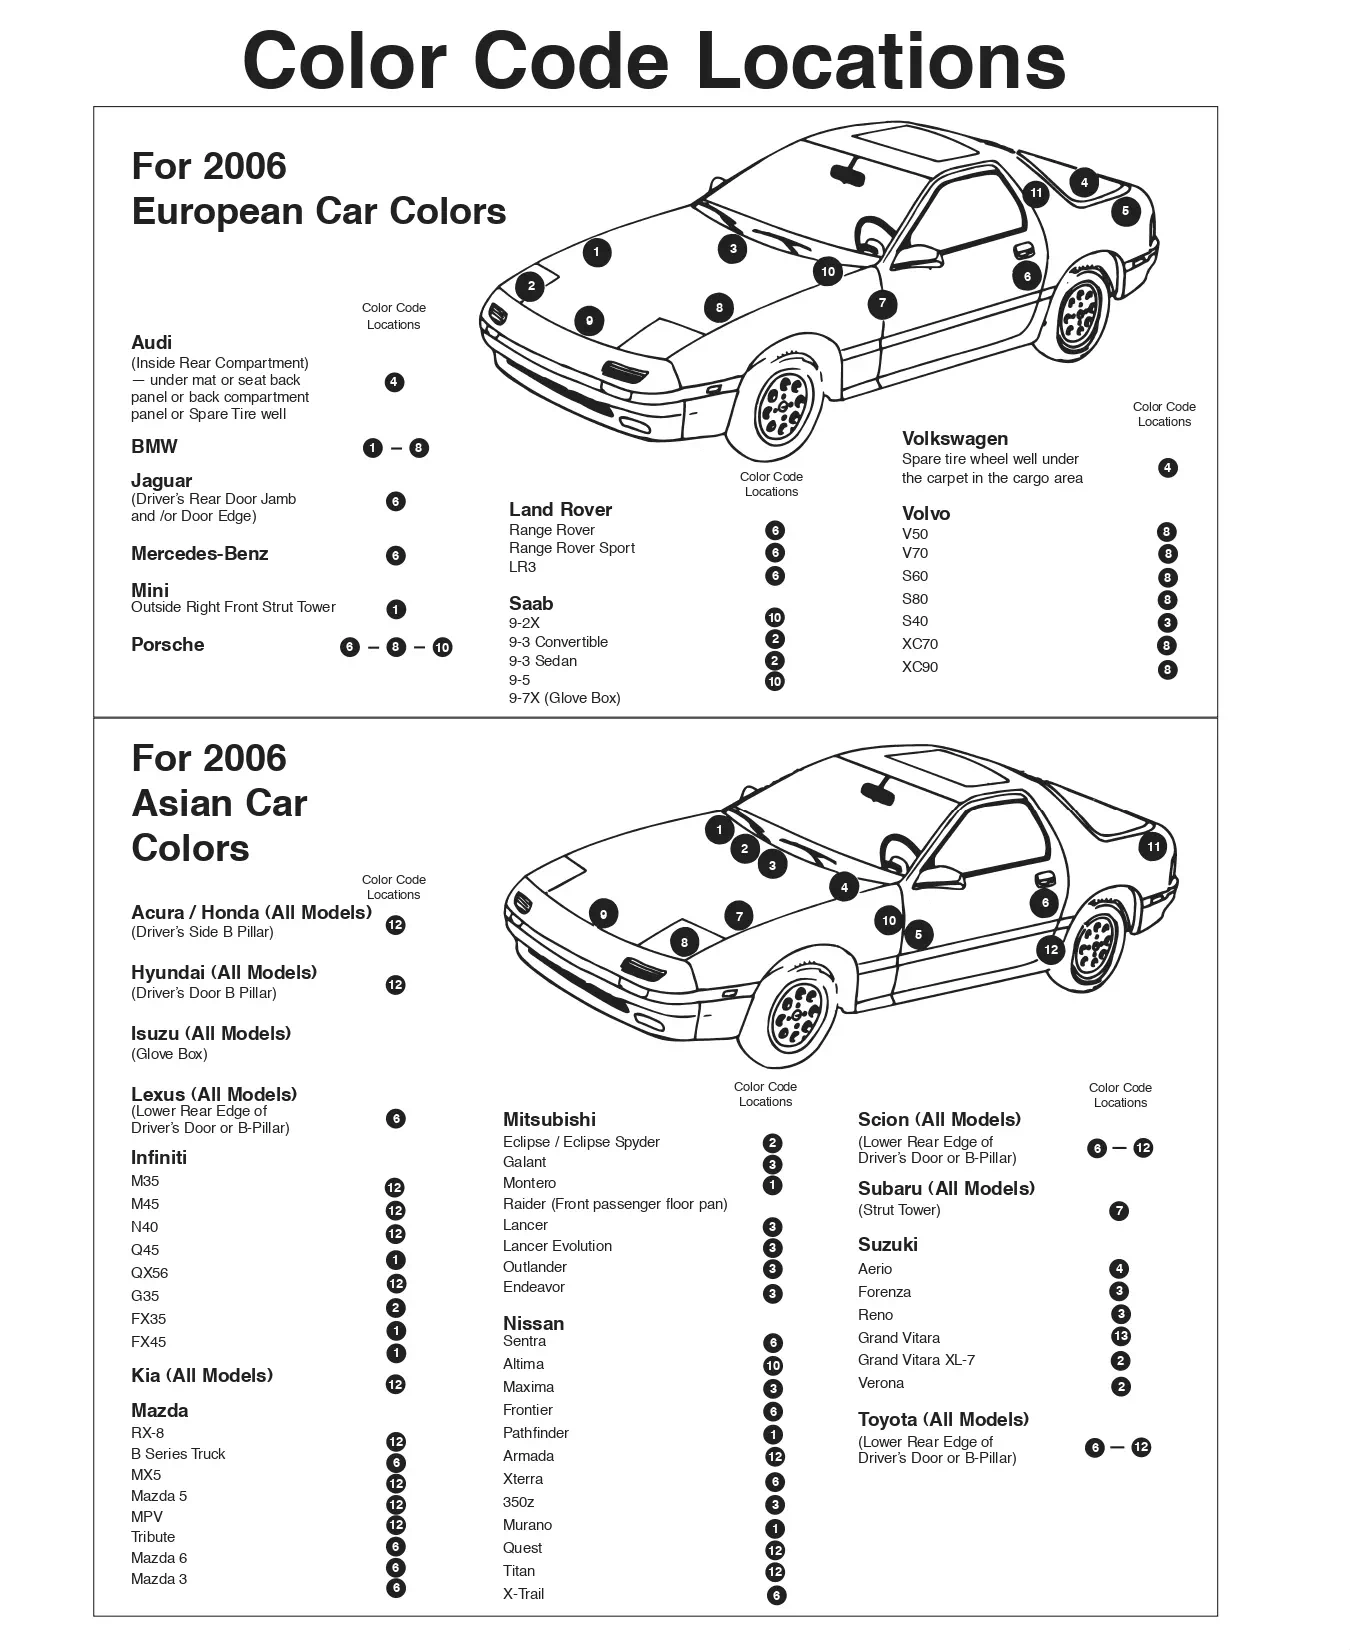 a picture showing the paint code sticker location for all vehicles imported into the United States in 2006